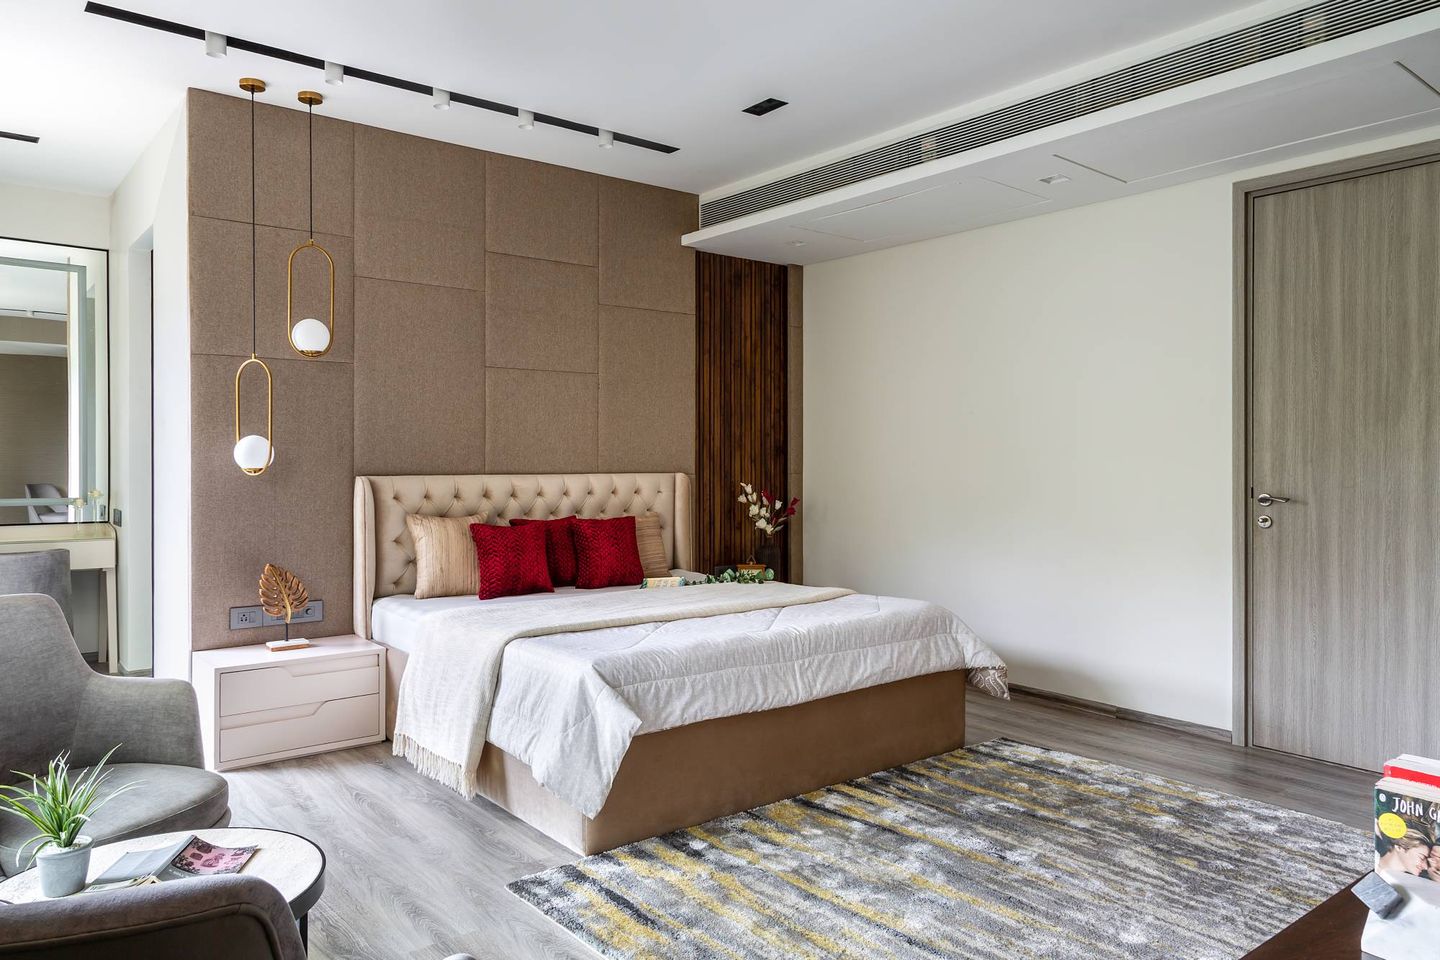 Modern Bedroom Design With A Beige Upholstered Bed And Matching Side Table With Drawers - Livspace